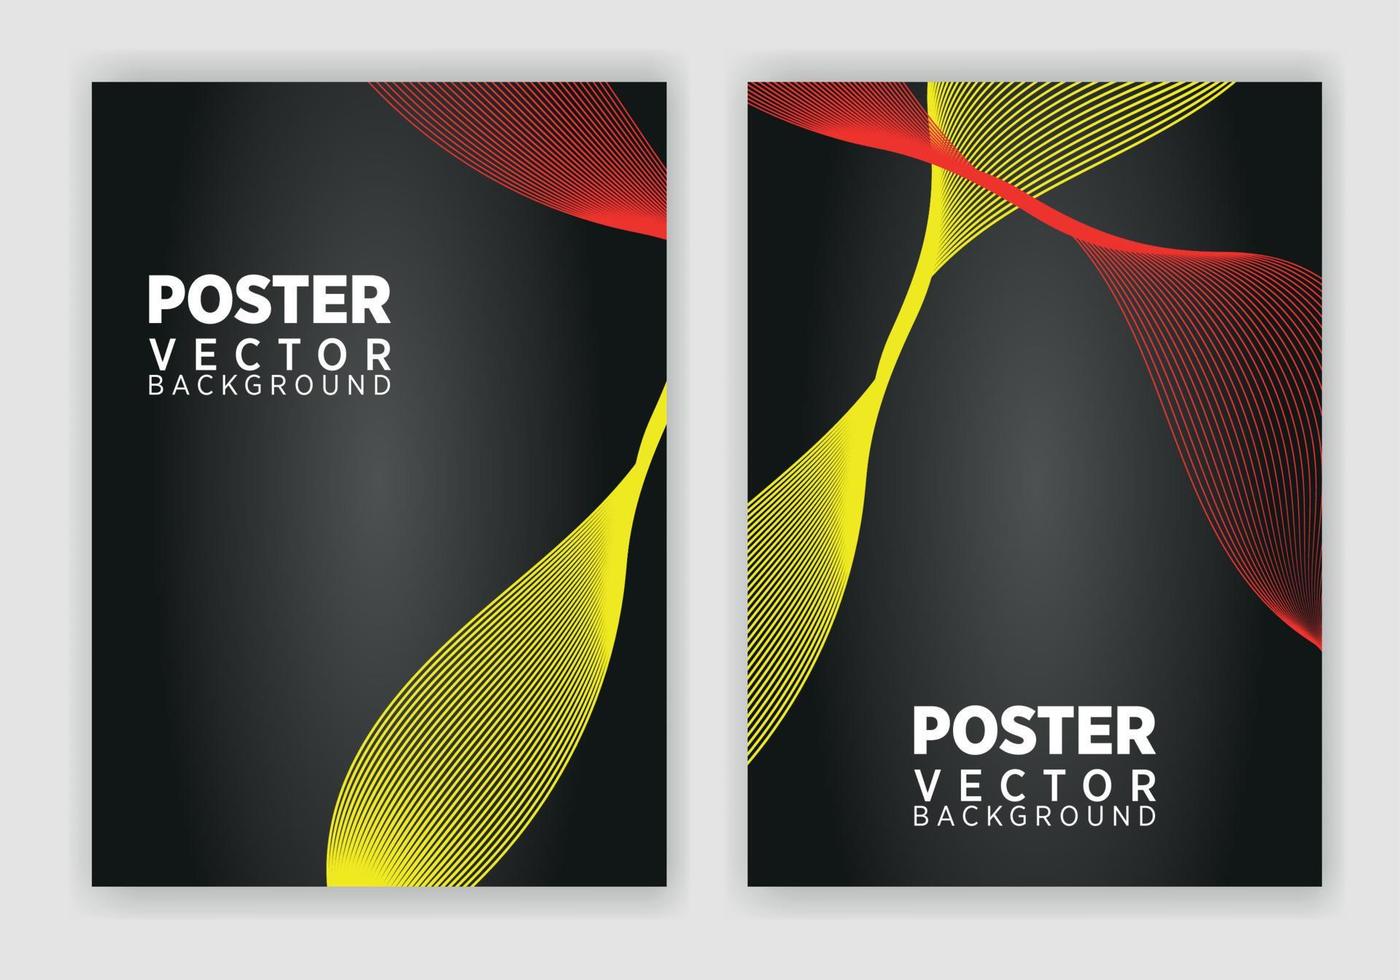 Set of Editable poster template. Can be used for poster, brochure, magazine vector